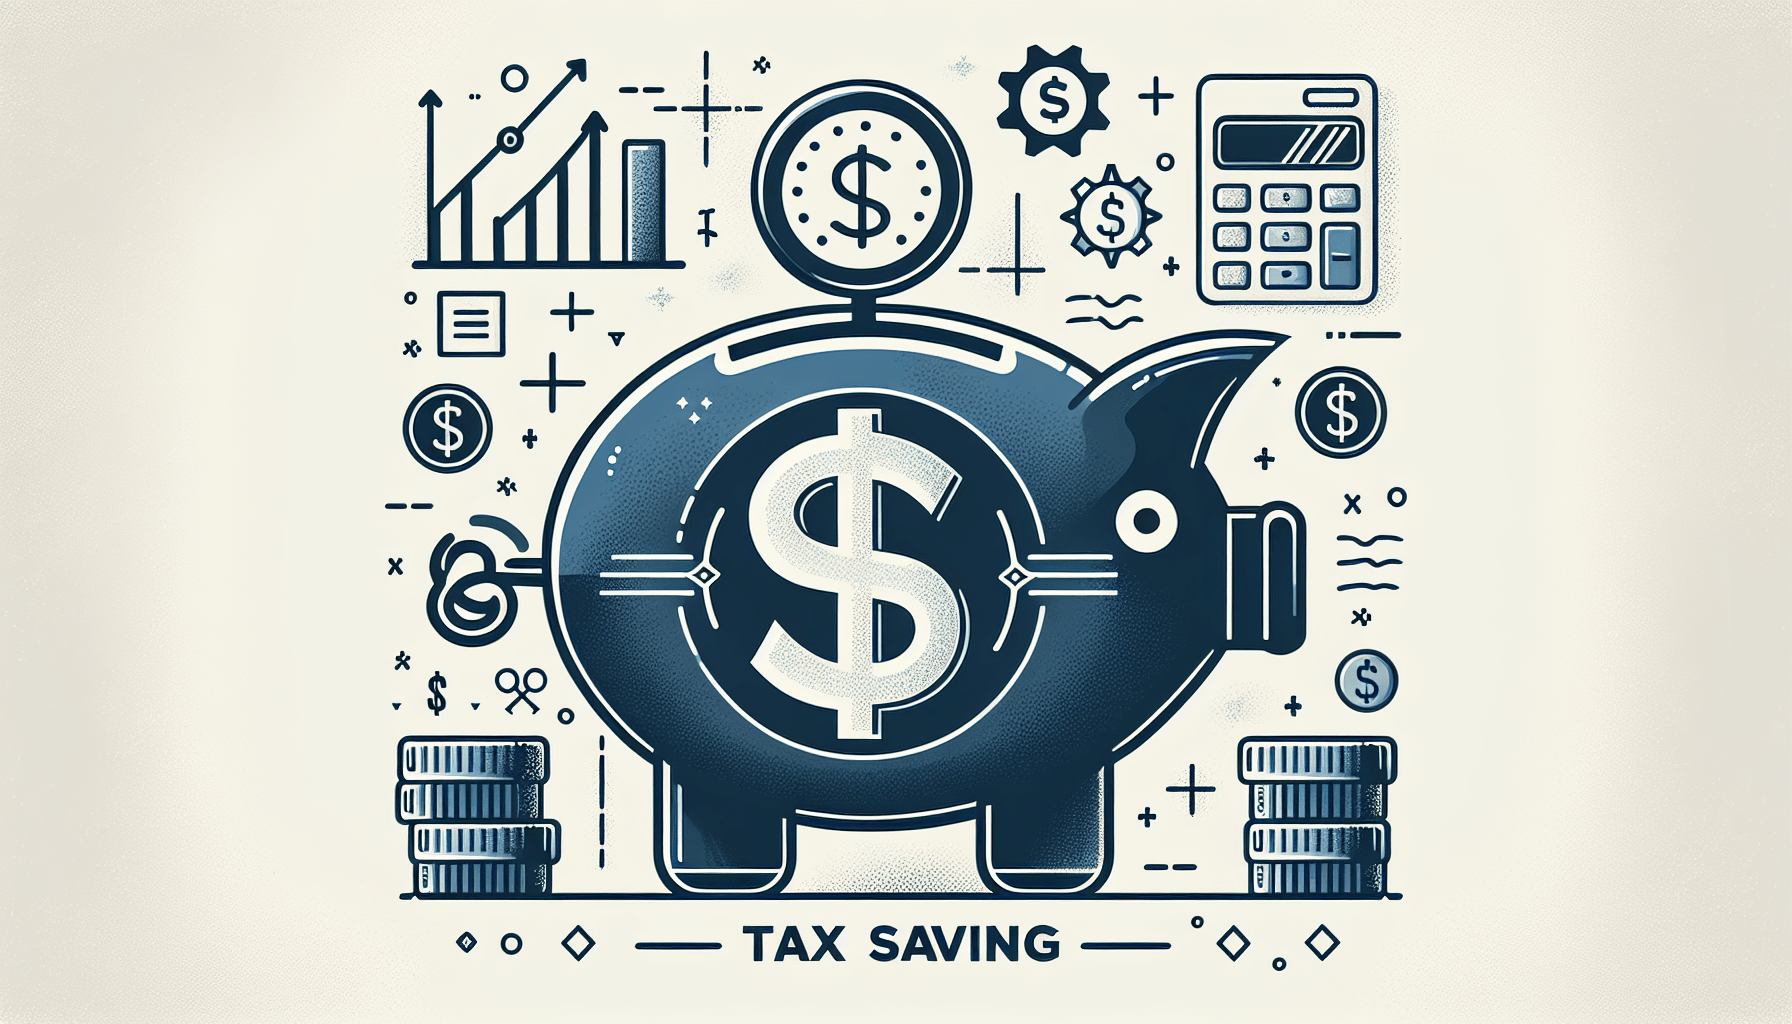 What Does Tax Saving Mean?